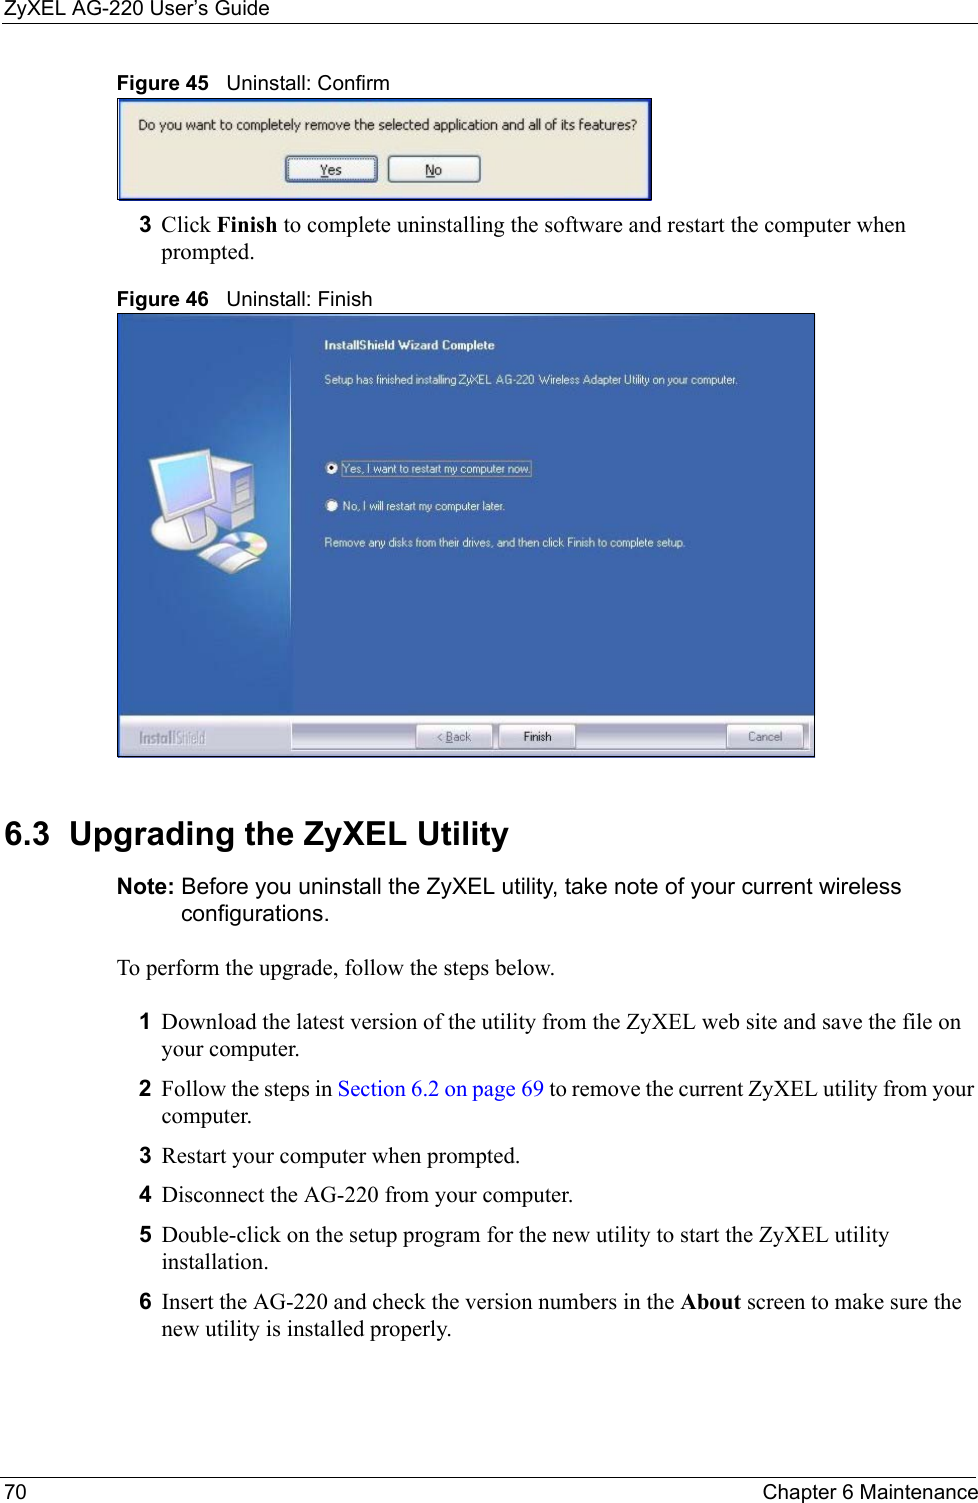 ZyXEL AG-220 User’s Guide70 Chapter 6 MaintenanceFigure 45   Uninstall: Confirm  3Click Finish to complete uninstalling the software and restart the computer when prompted.Figure 46   Uninstall: Finish 6.3  Upgrading the ZyXEL Utility Note: Before you uninstall the ZyXEL utility, take note of your current wireless configurations.To perform the upgrade, follow the steps below.1Download the latest version of the utility from the ZyXEL web site and save the file on your computer.2Follow the steps in Section 6.2 on page 69 to remove the current ZyXEL utility from your computer.3Restart your computer when prompted.4Disconnect the AG-220 from your computer.5Double-click on the setup program for the new utility to start the ZyXEL utility installation.6Insert the AG-220 and check the version numbers in the About screen to make sure the new utility is installed properly.